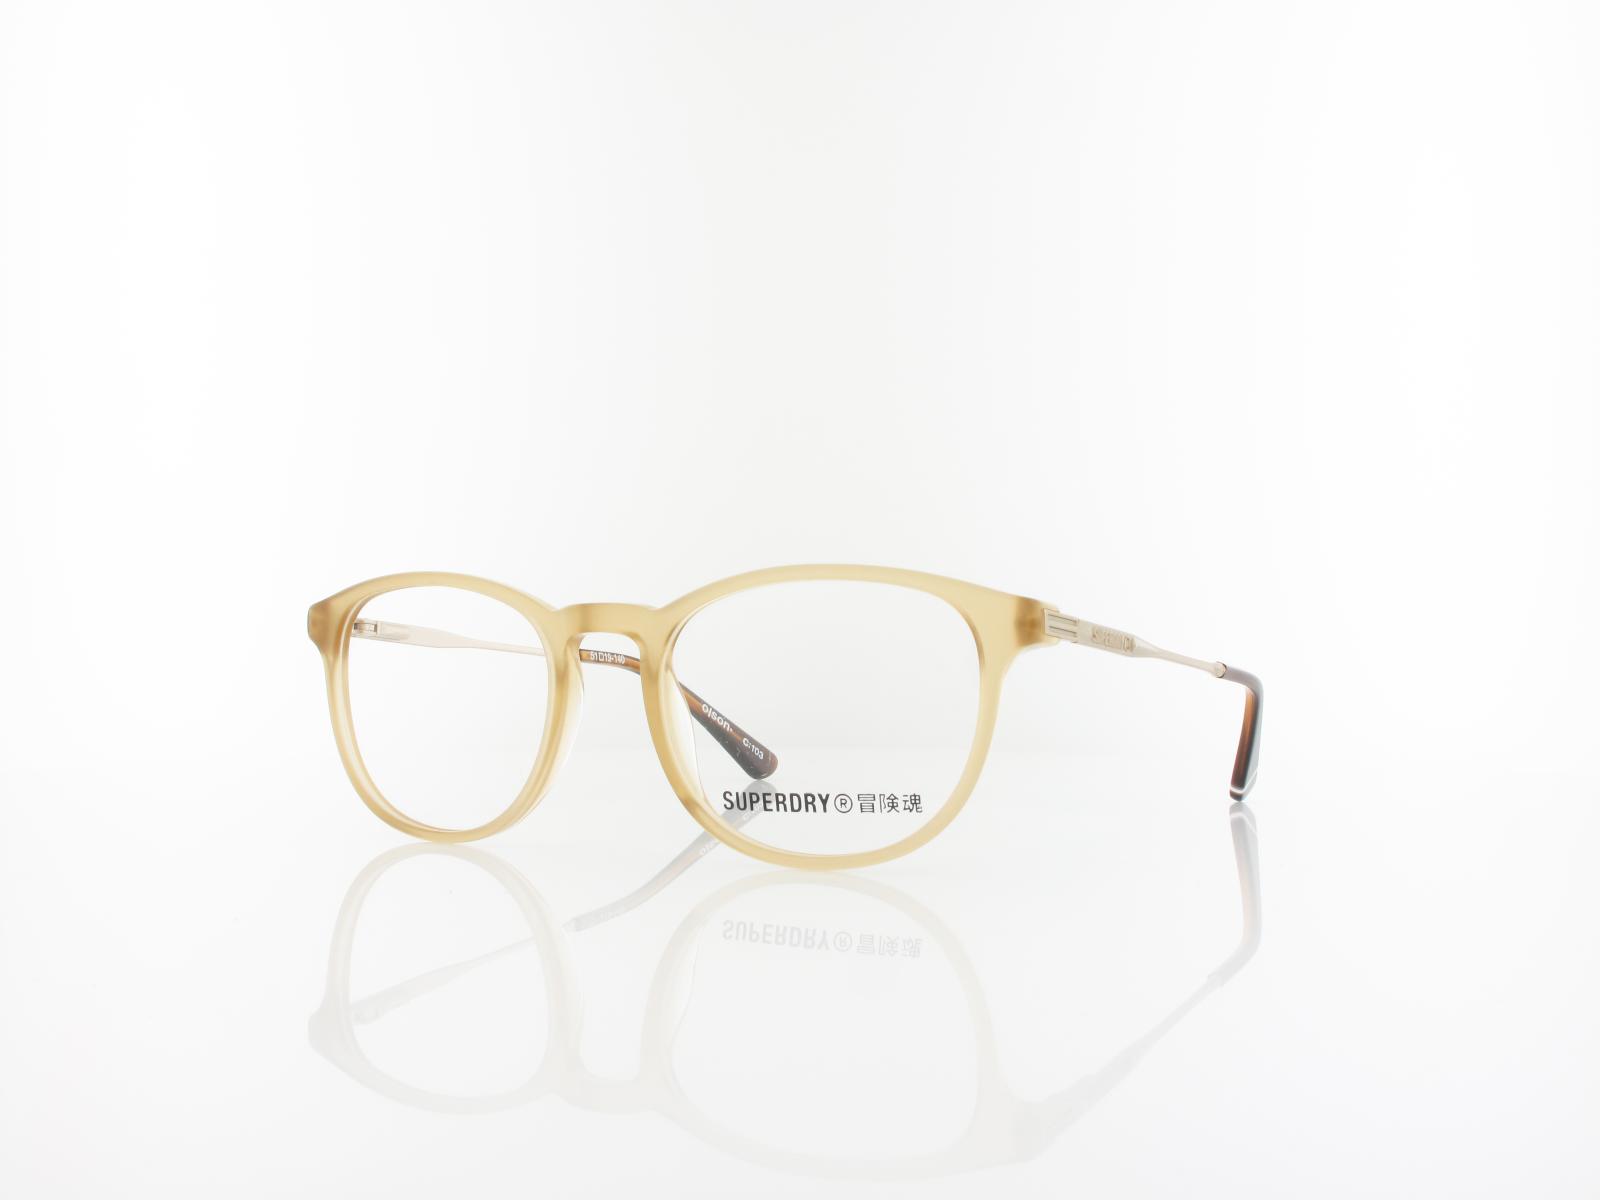 Superdry | Olson 103 51 | nude gold